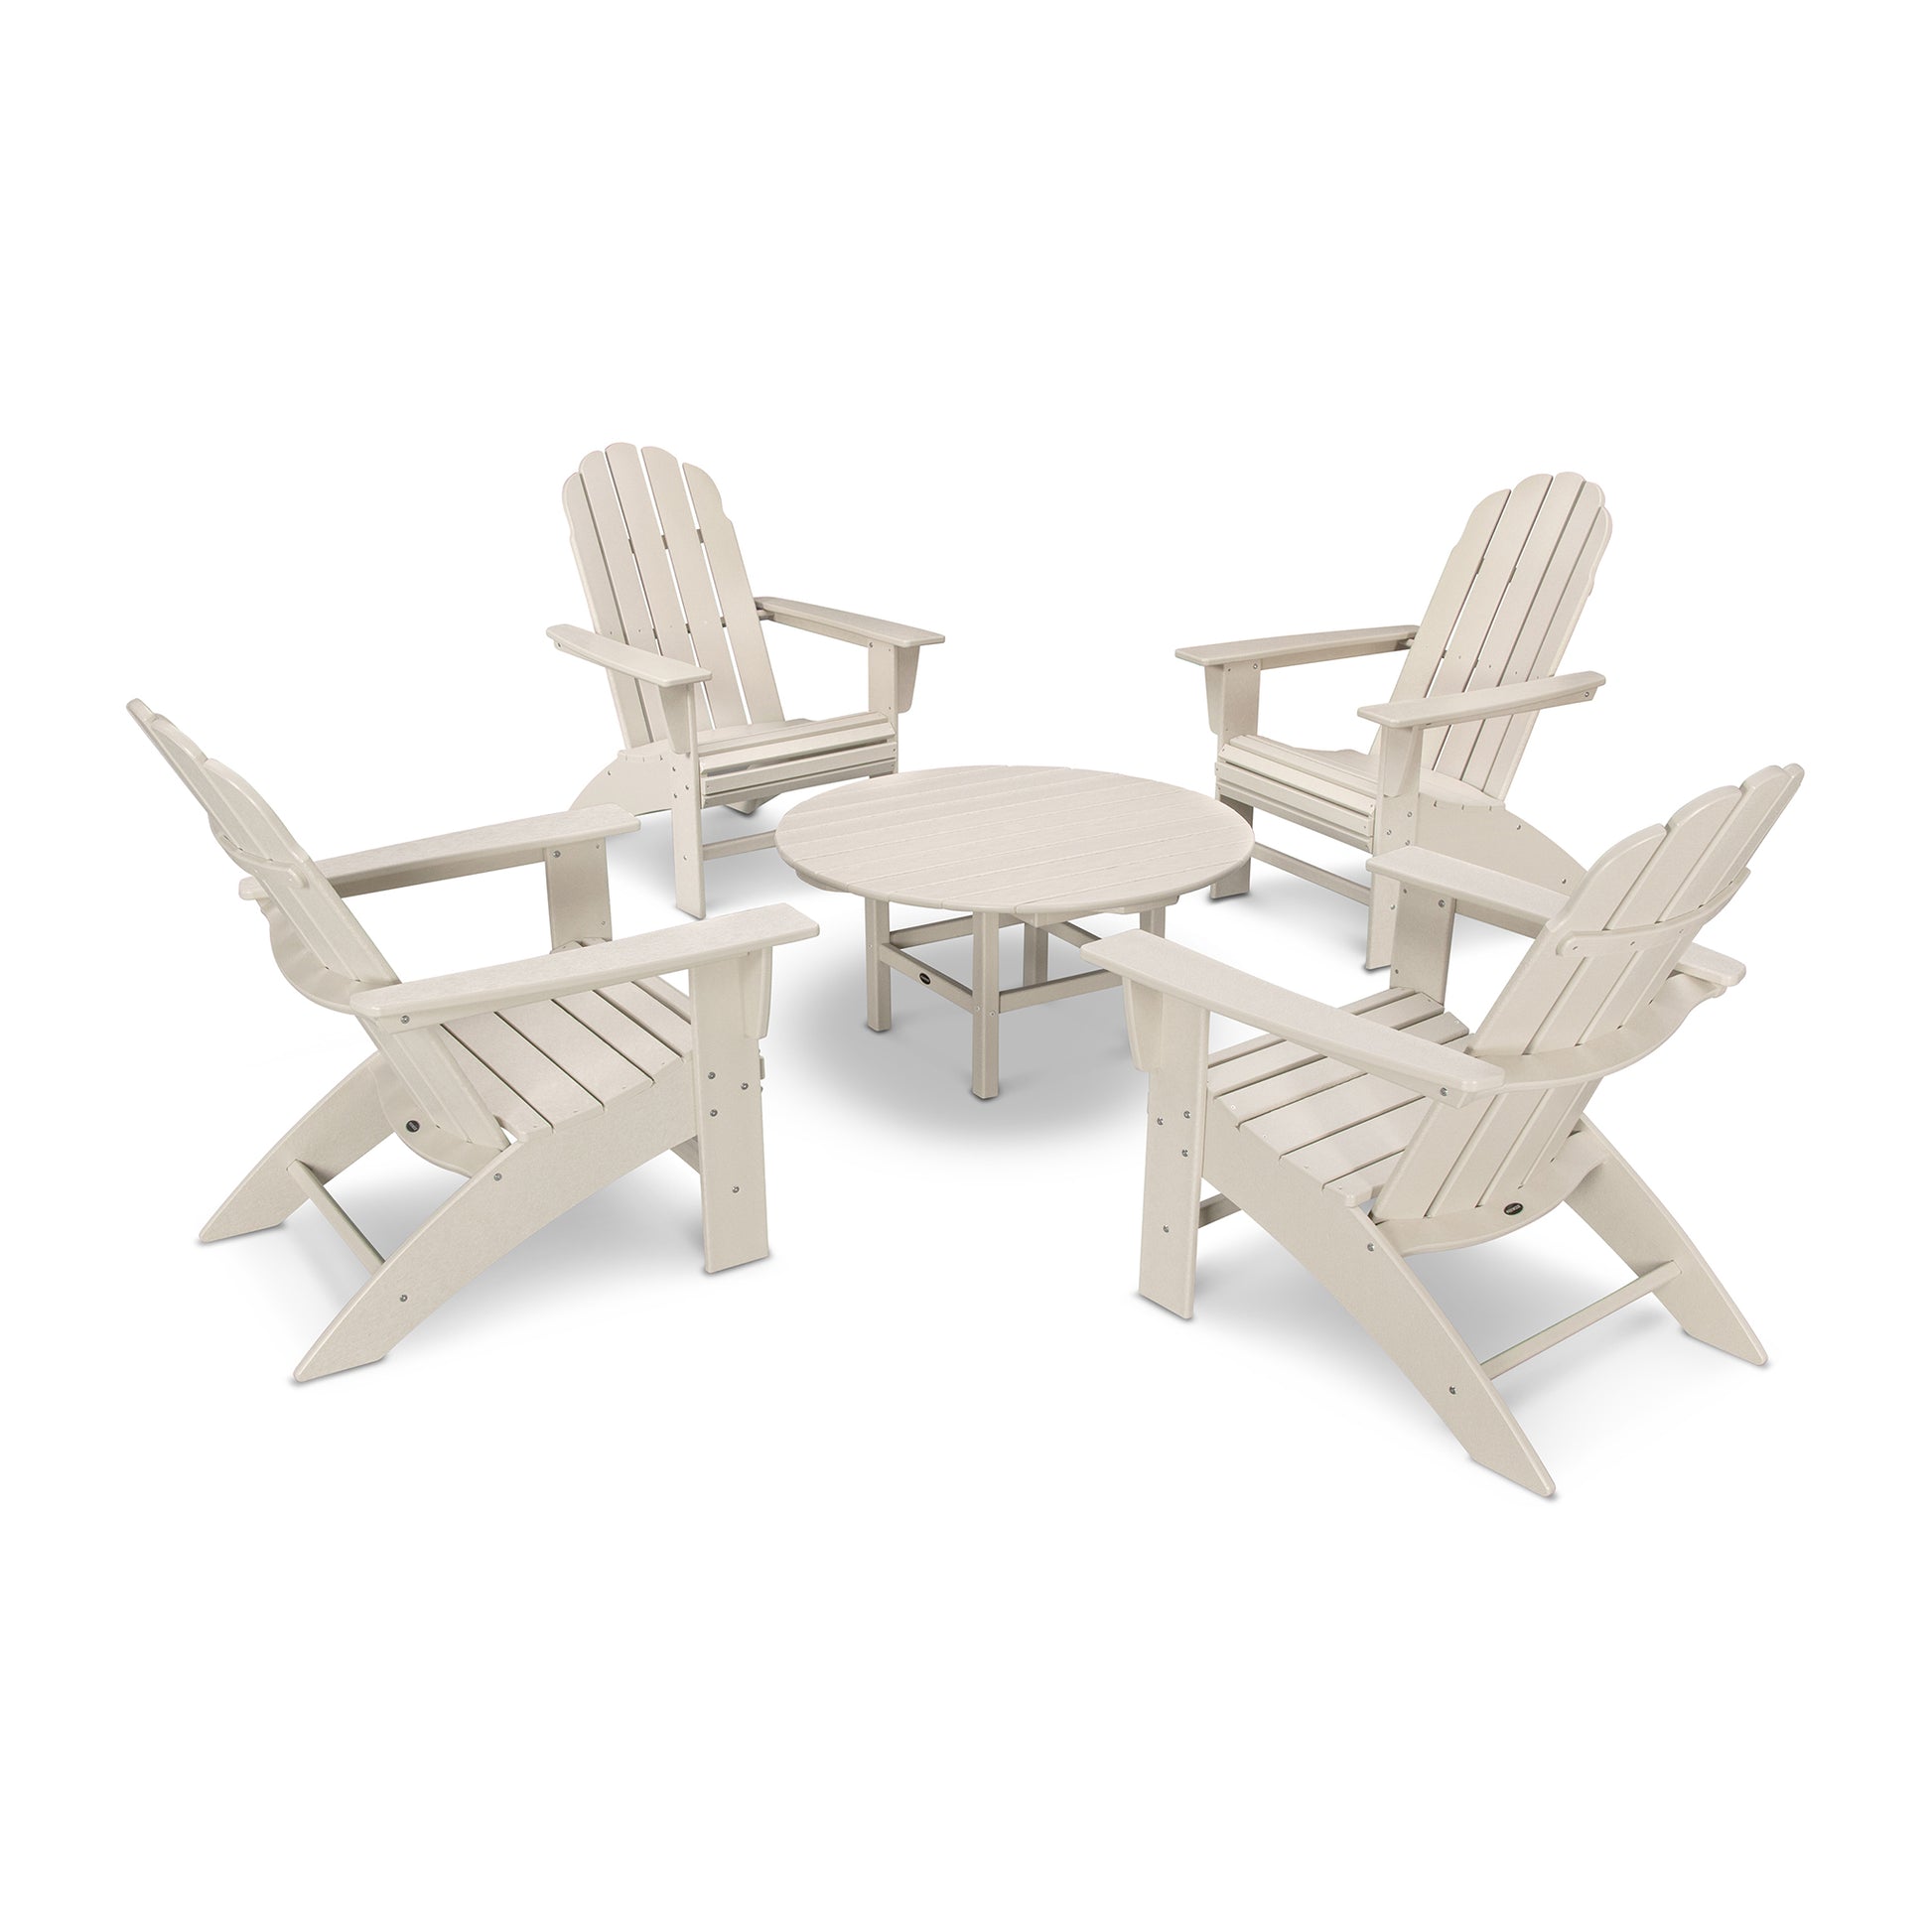 Four beige POLYWOOD Vineyard Adirondack chairs arranged around a small, matching round table on a plain white background.